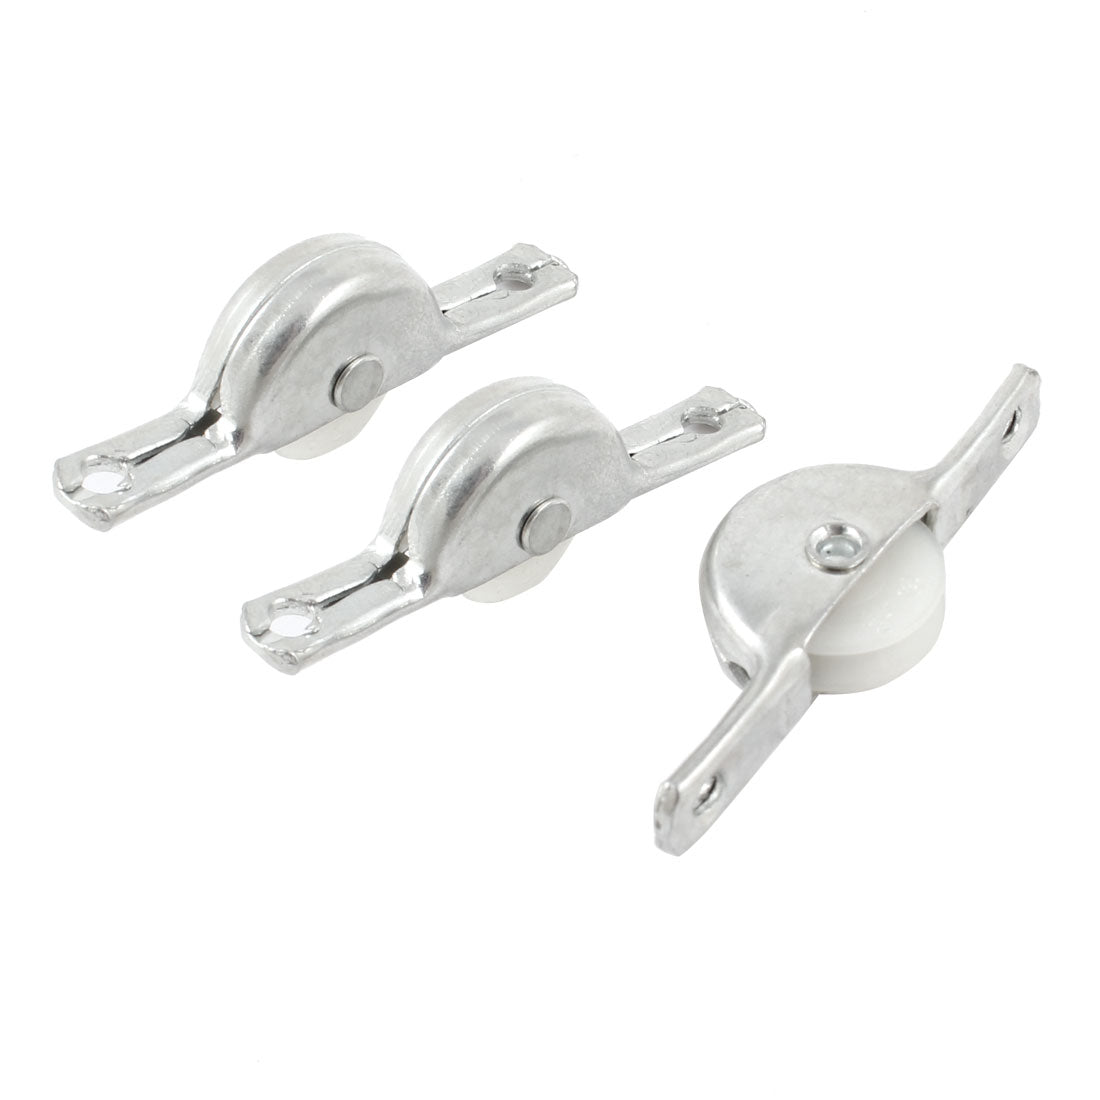 uxcell Uxcell Wardrobe Door Hardware Top Plate White Plastic Wheel Roller 3 Pcs